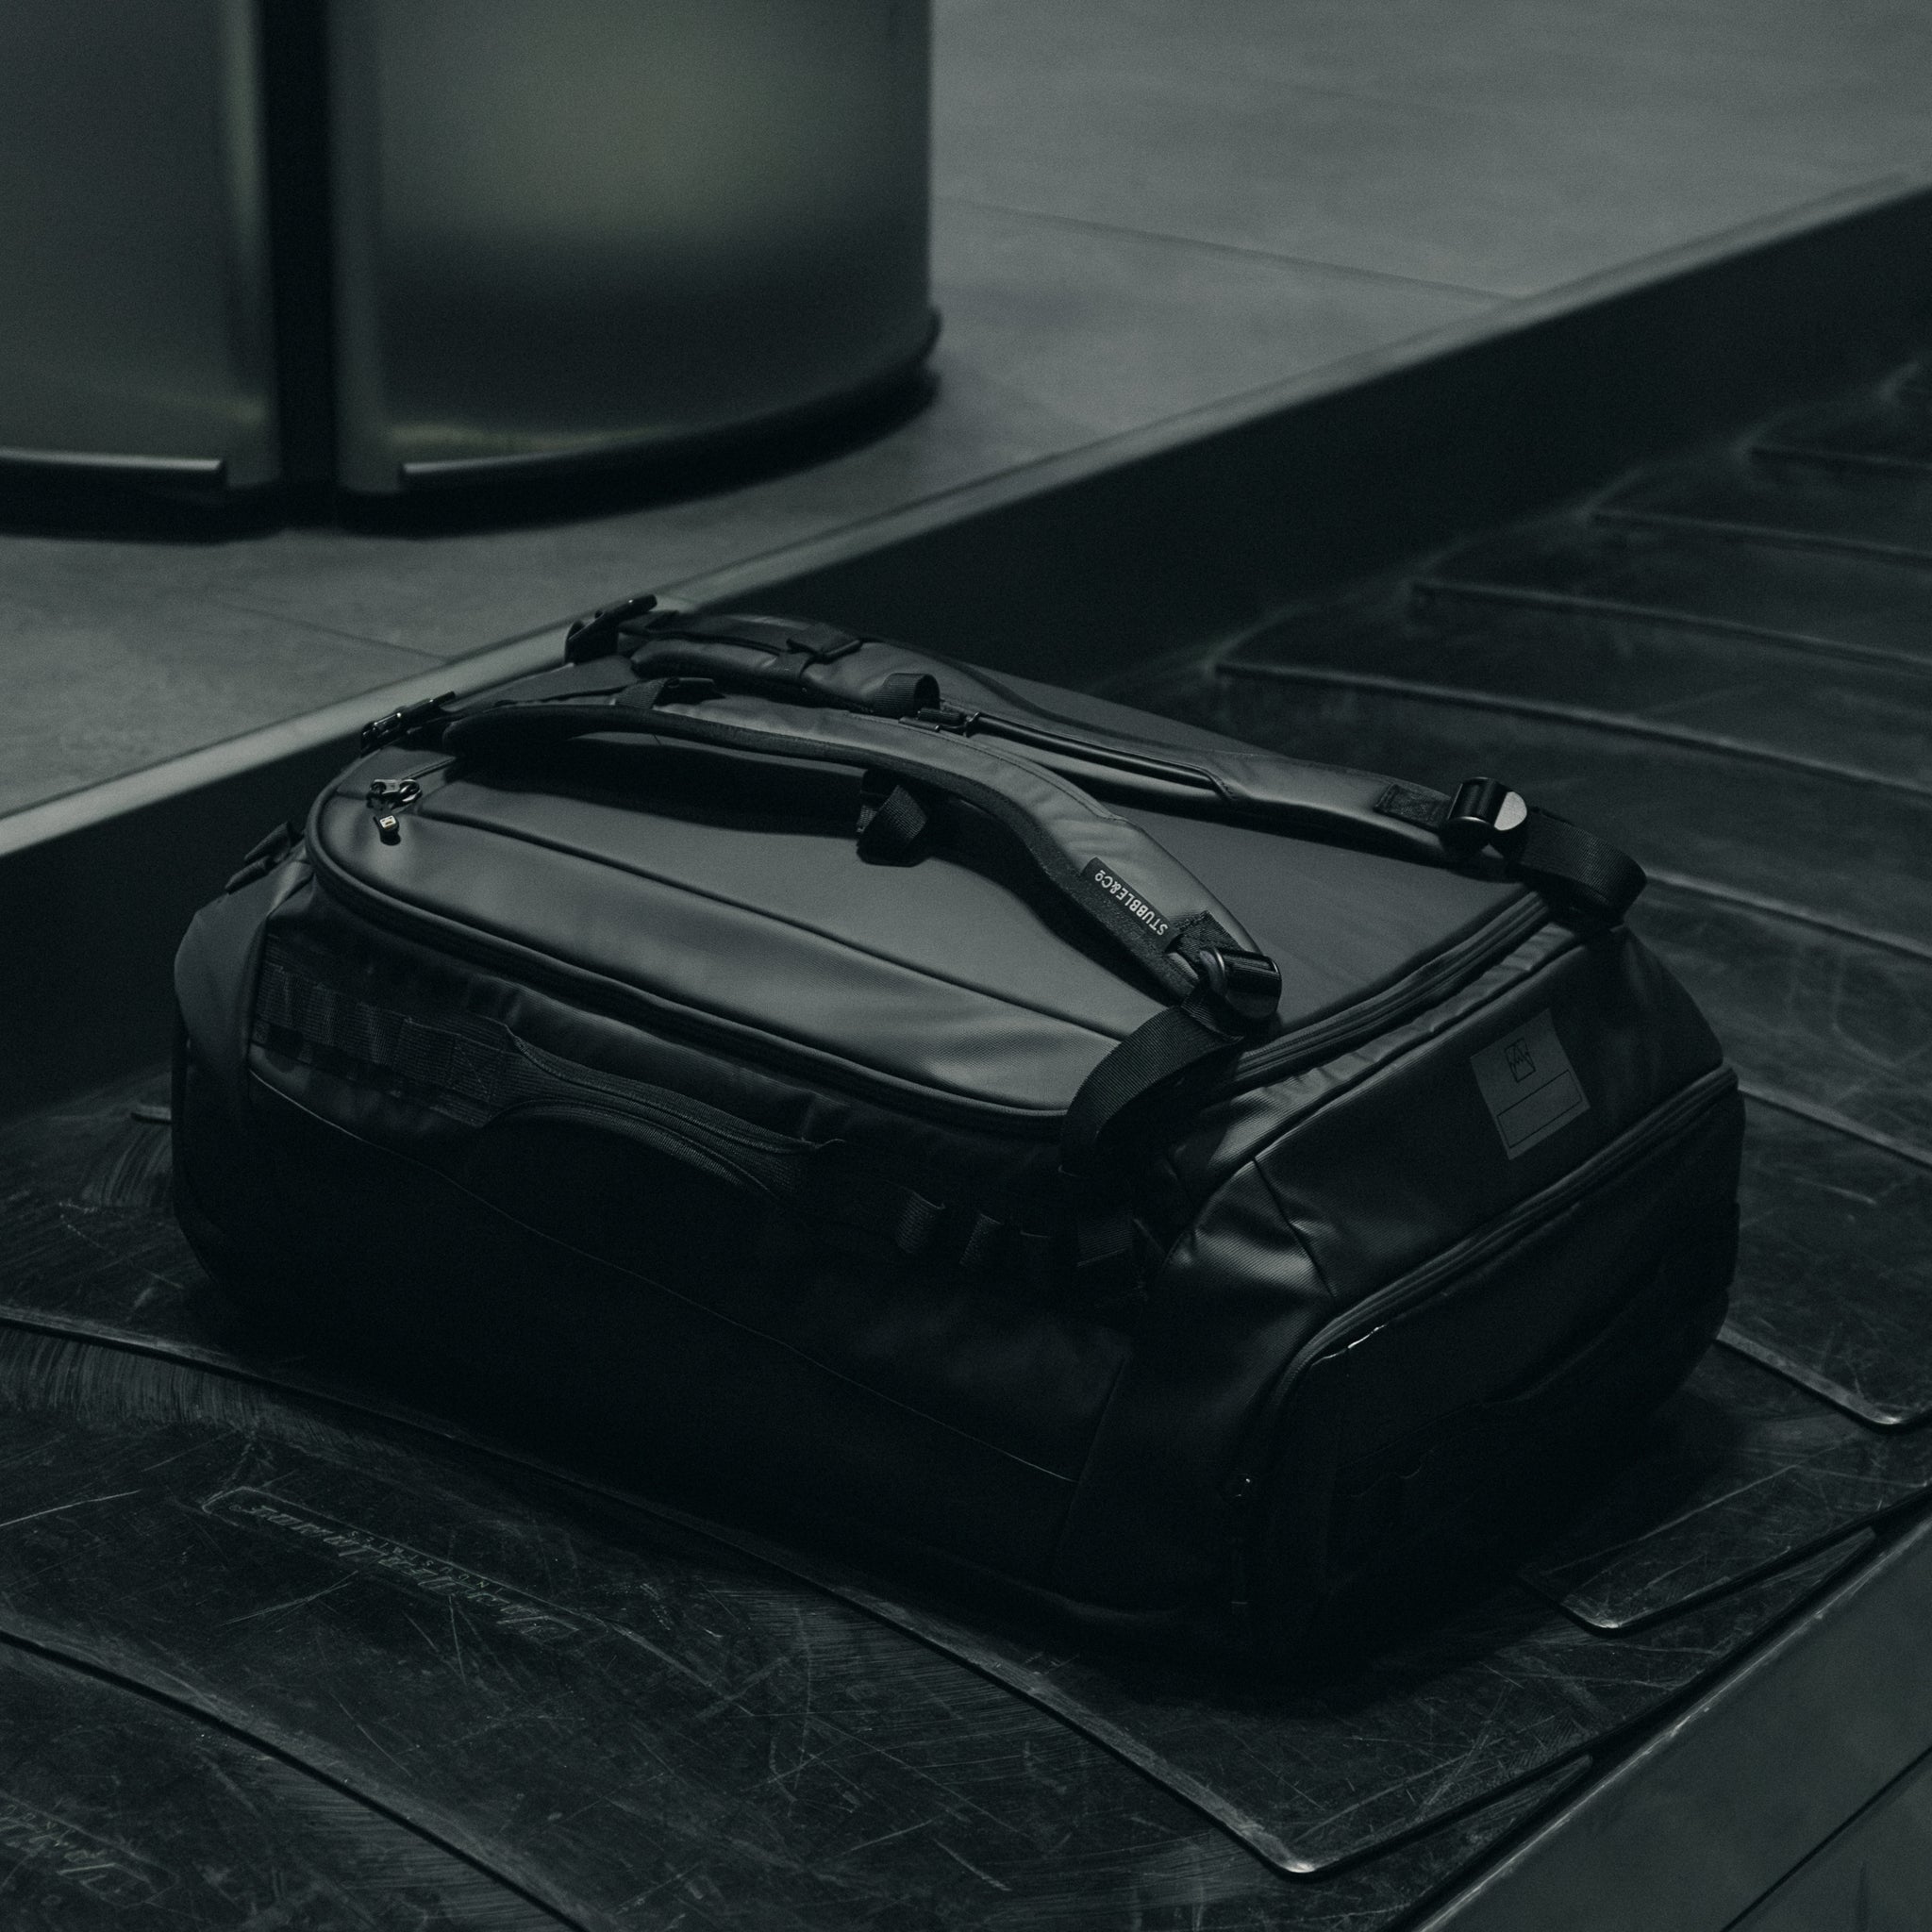 An All Black Kit Bag 65L in the baggage carousel at an airport